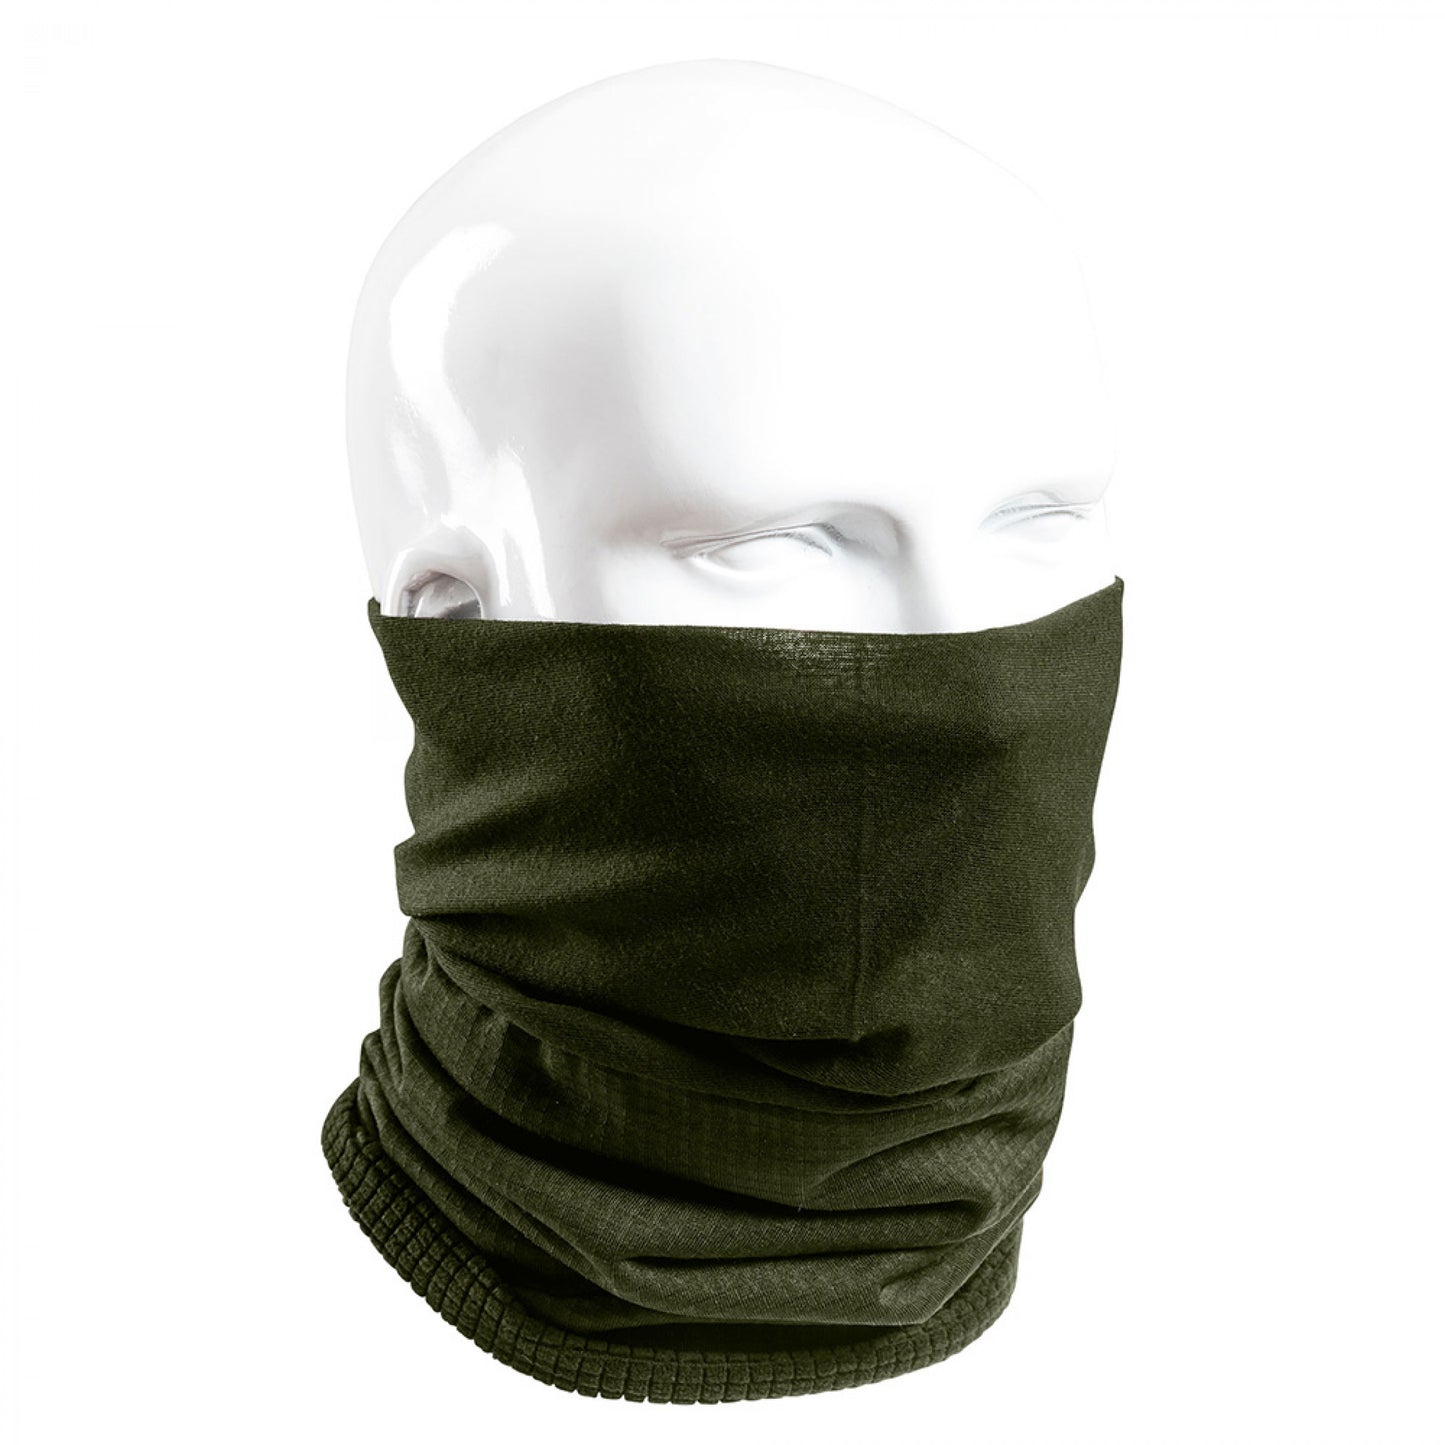 Tour de cou Thermo Performer 0°C > -10°C vert olive